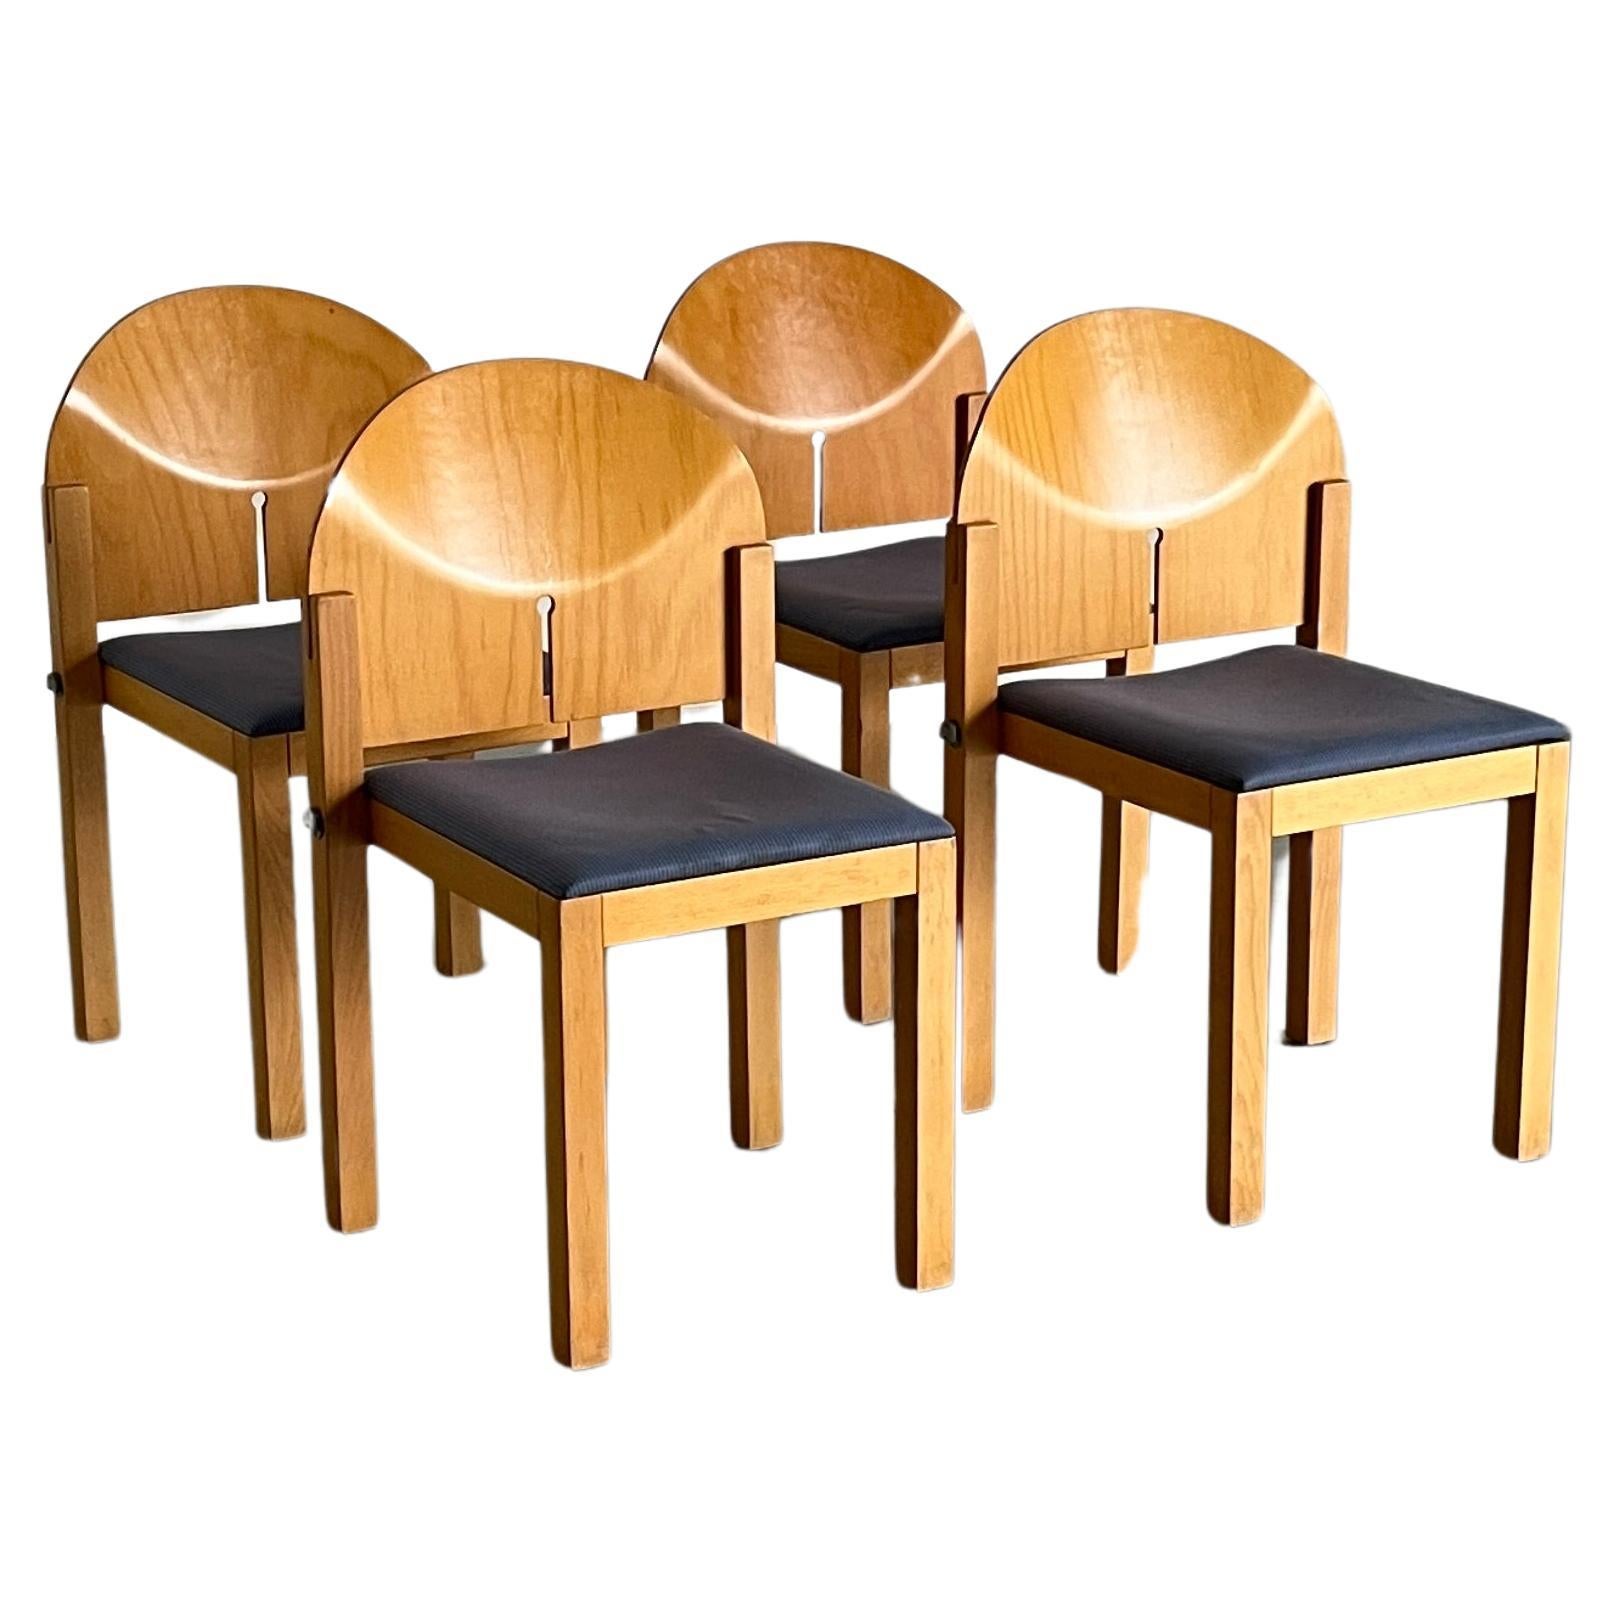 Set of 4 Postmodern Sculptural Wooden Dining Chairs by Arno Votteler, 1980s